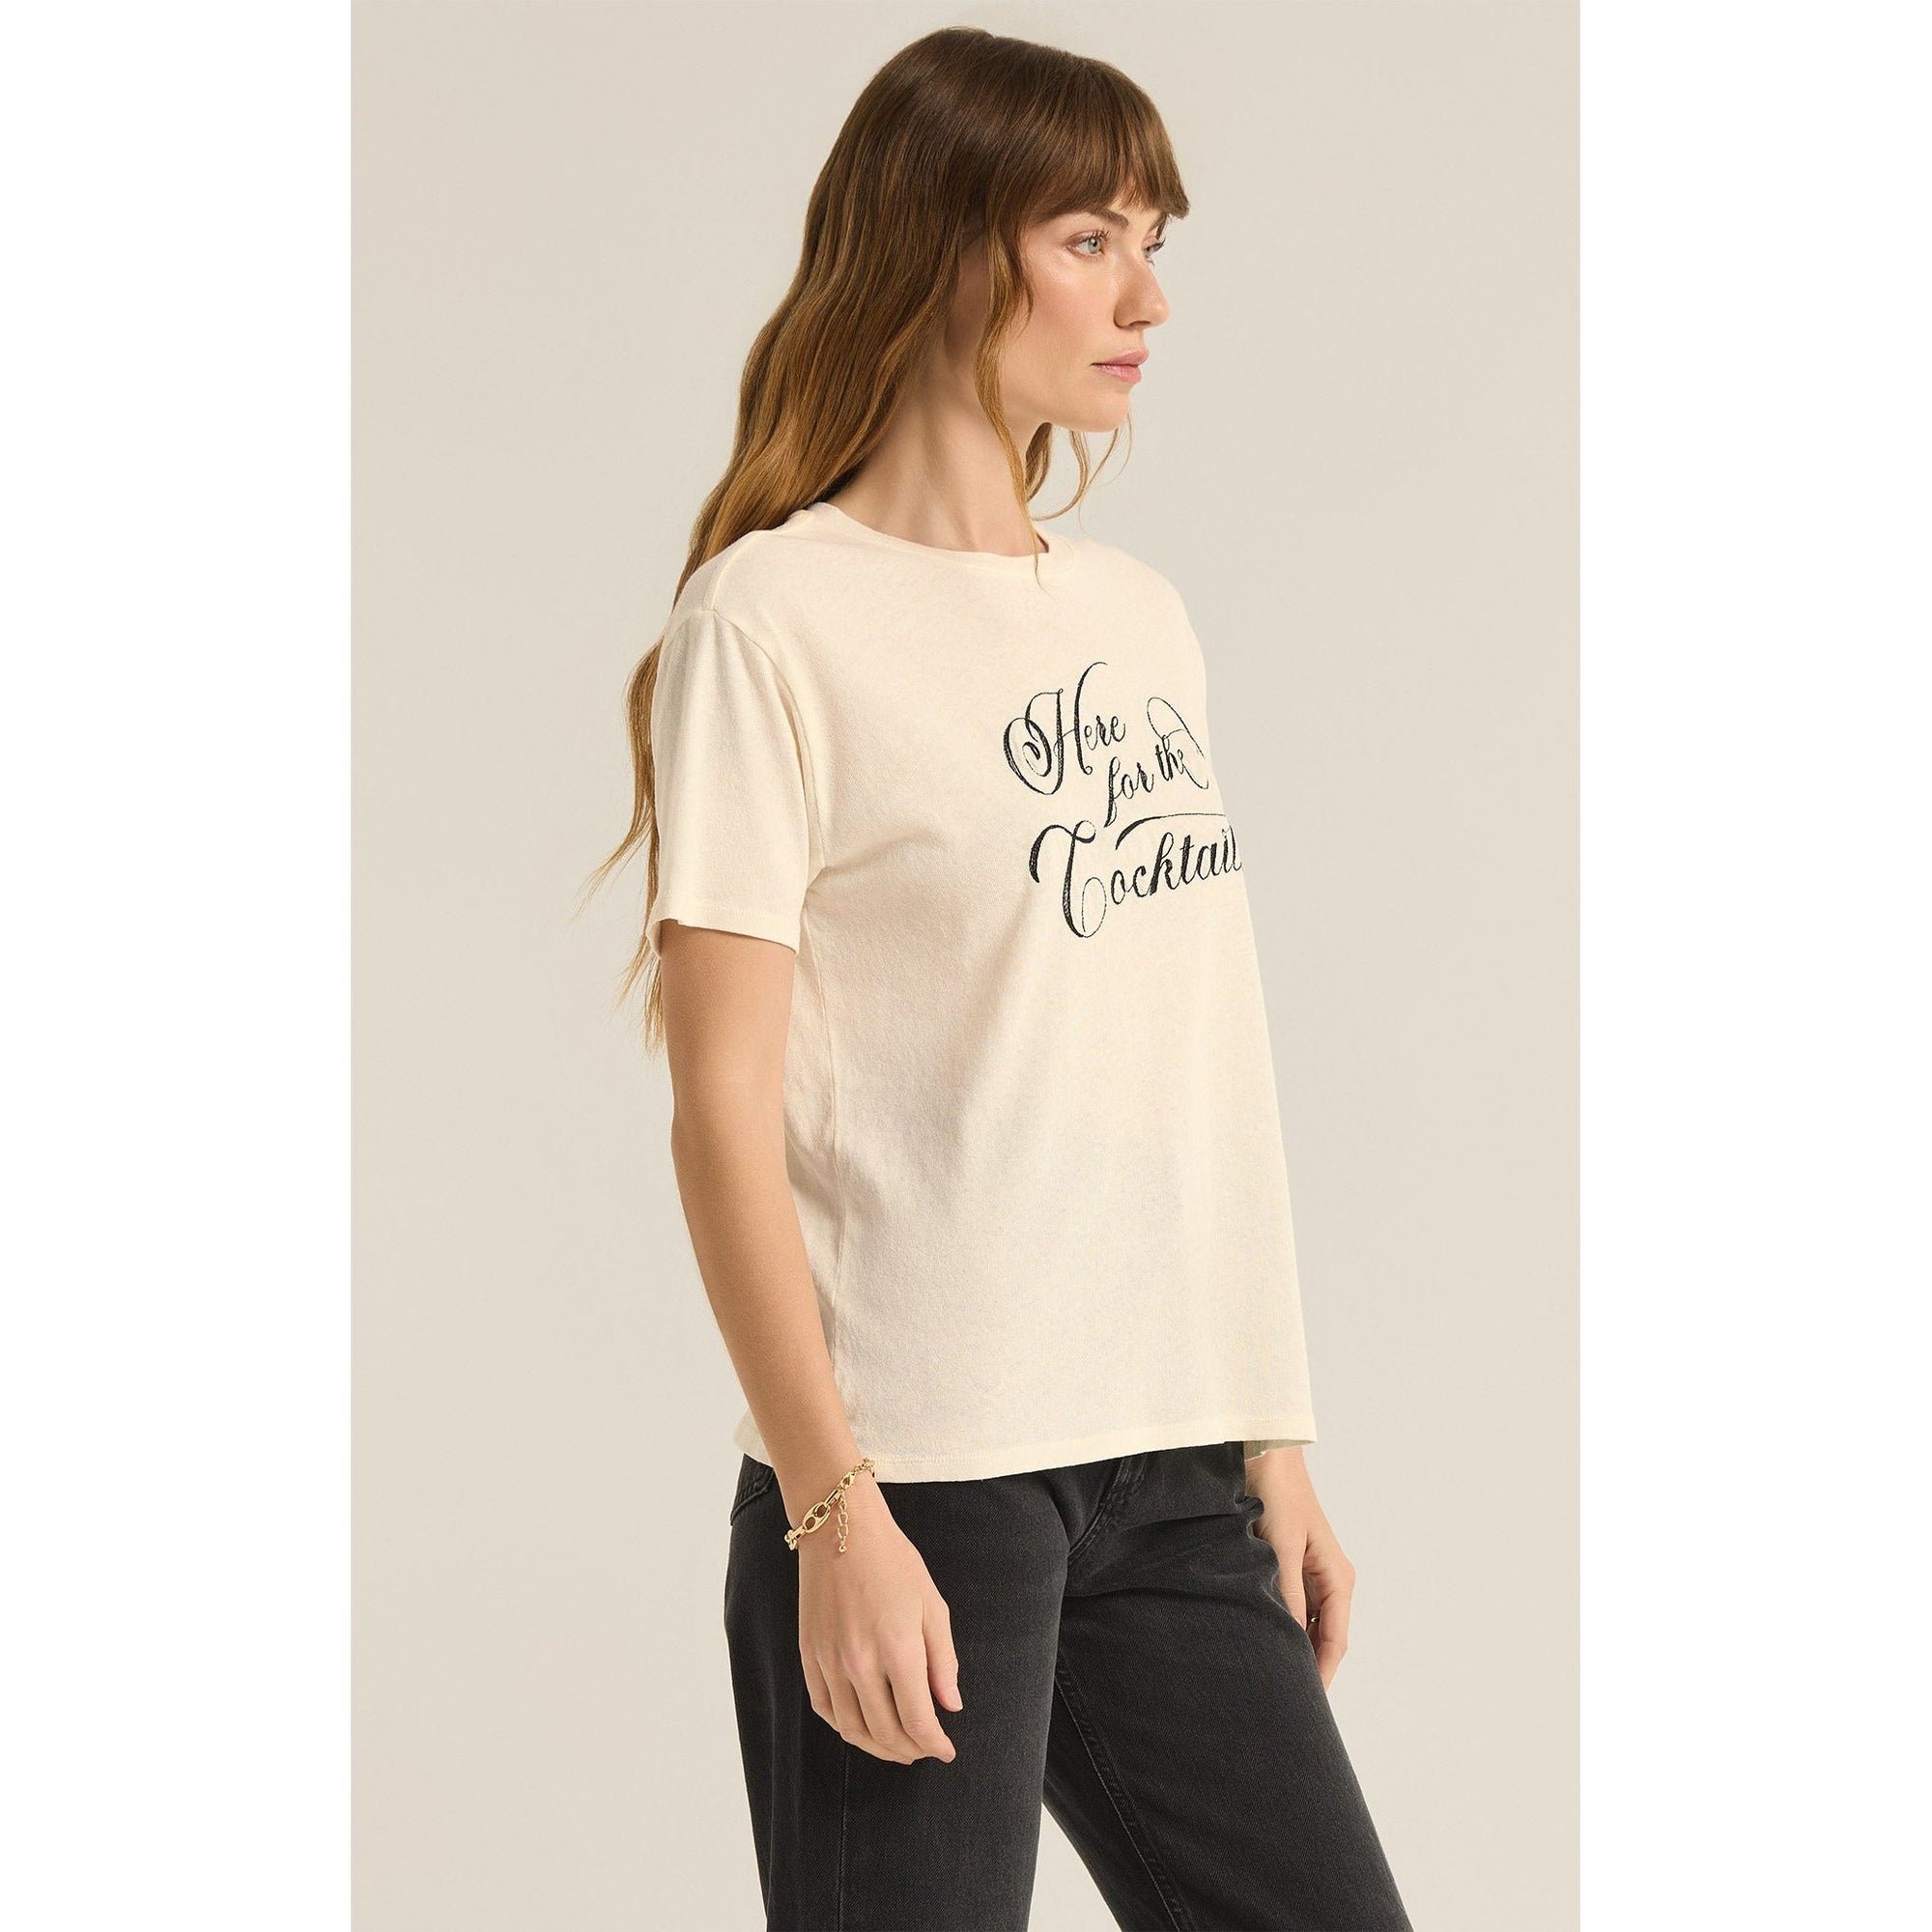 Z Supply Cocktails Pacific Tee